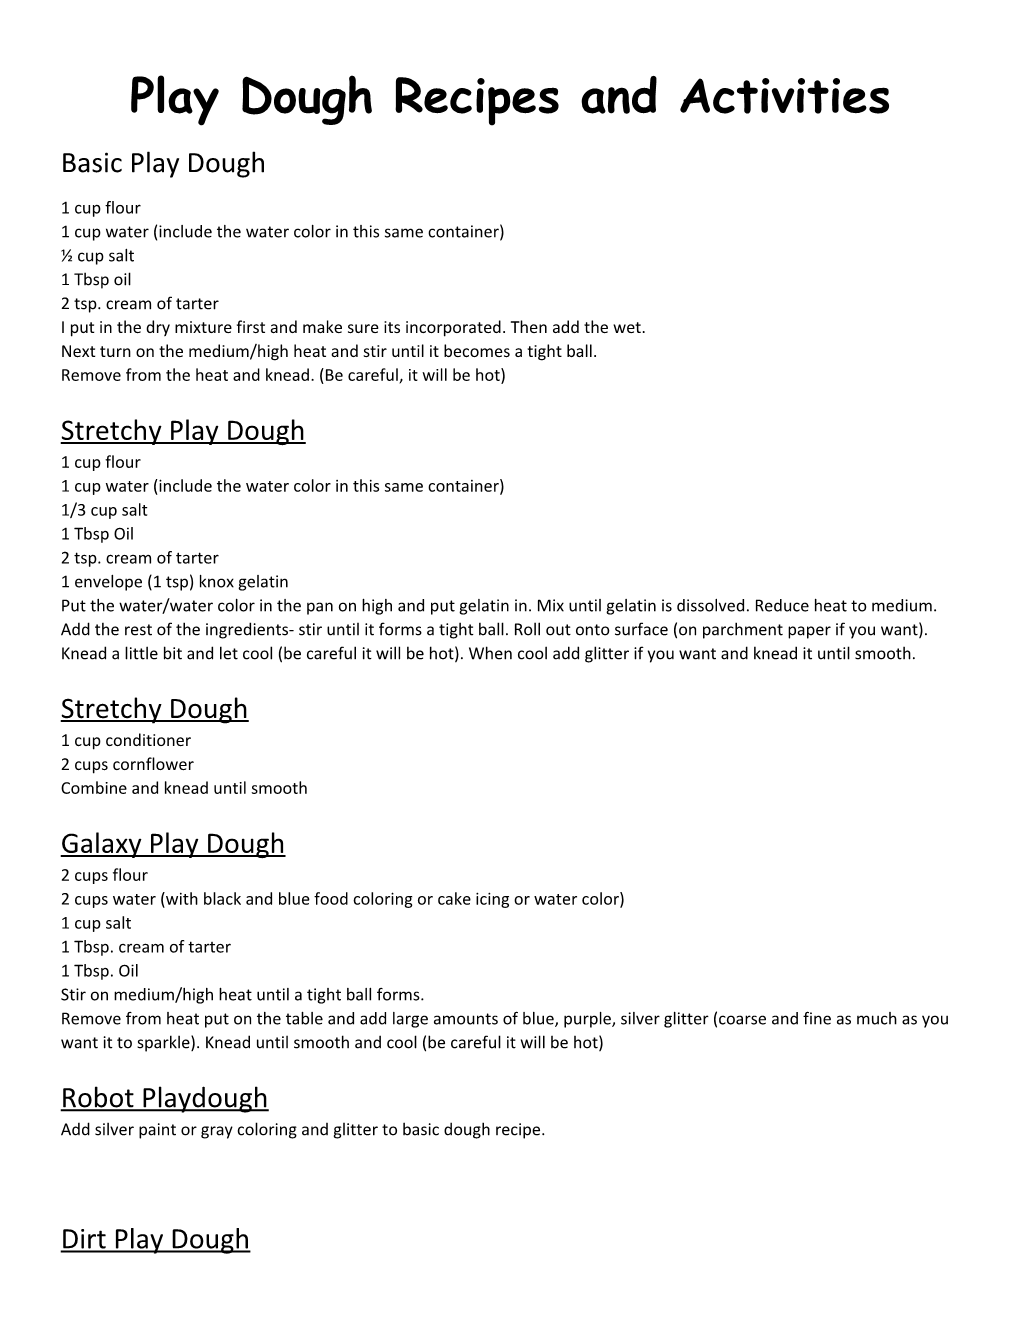 Play Dough Recipes and Activities